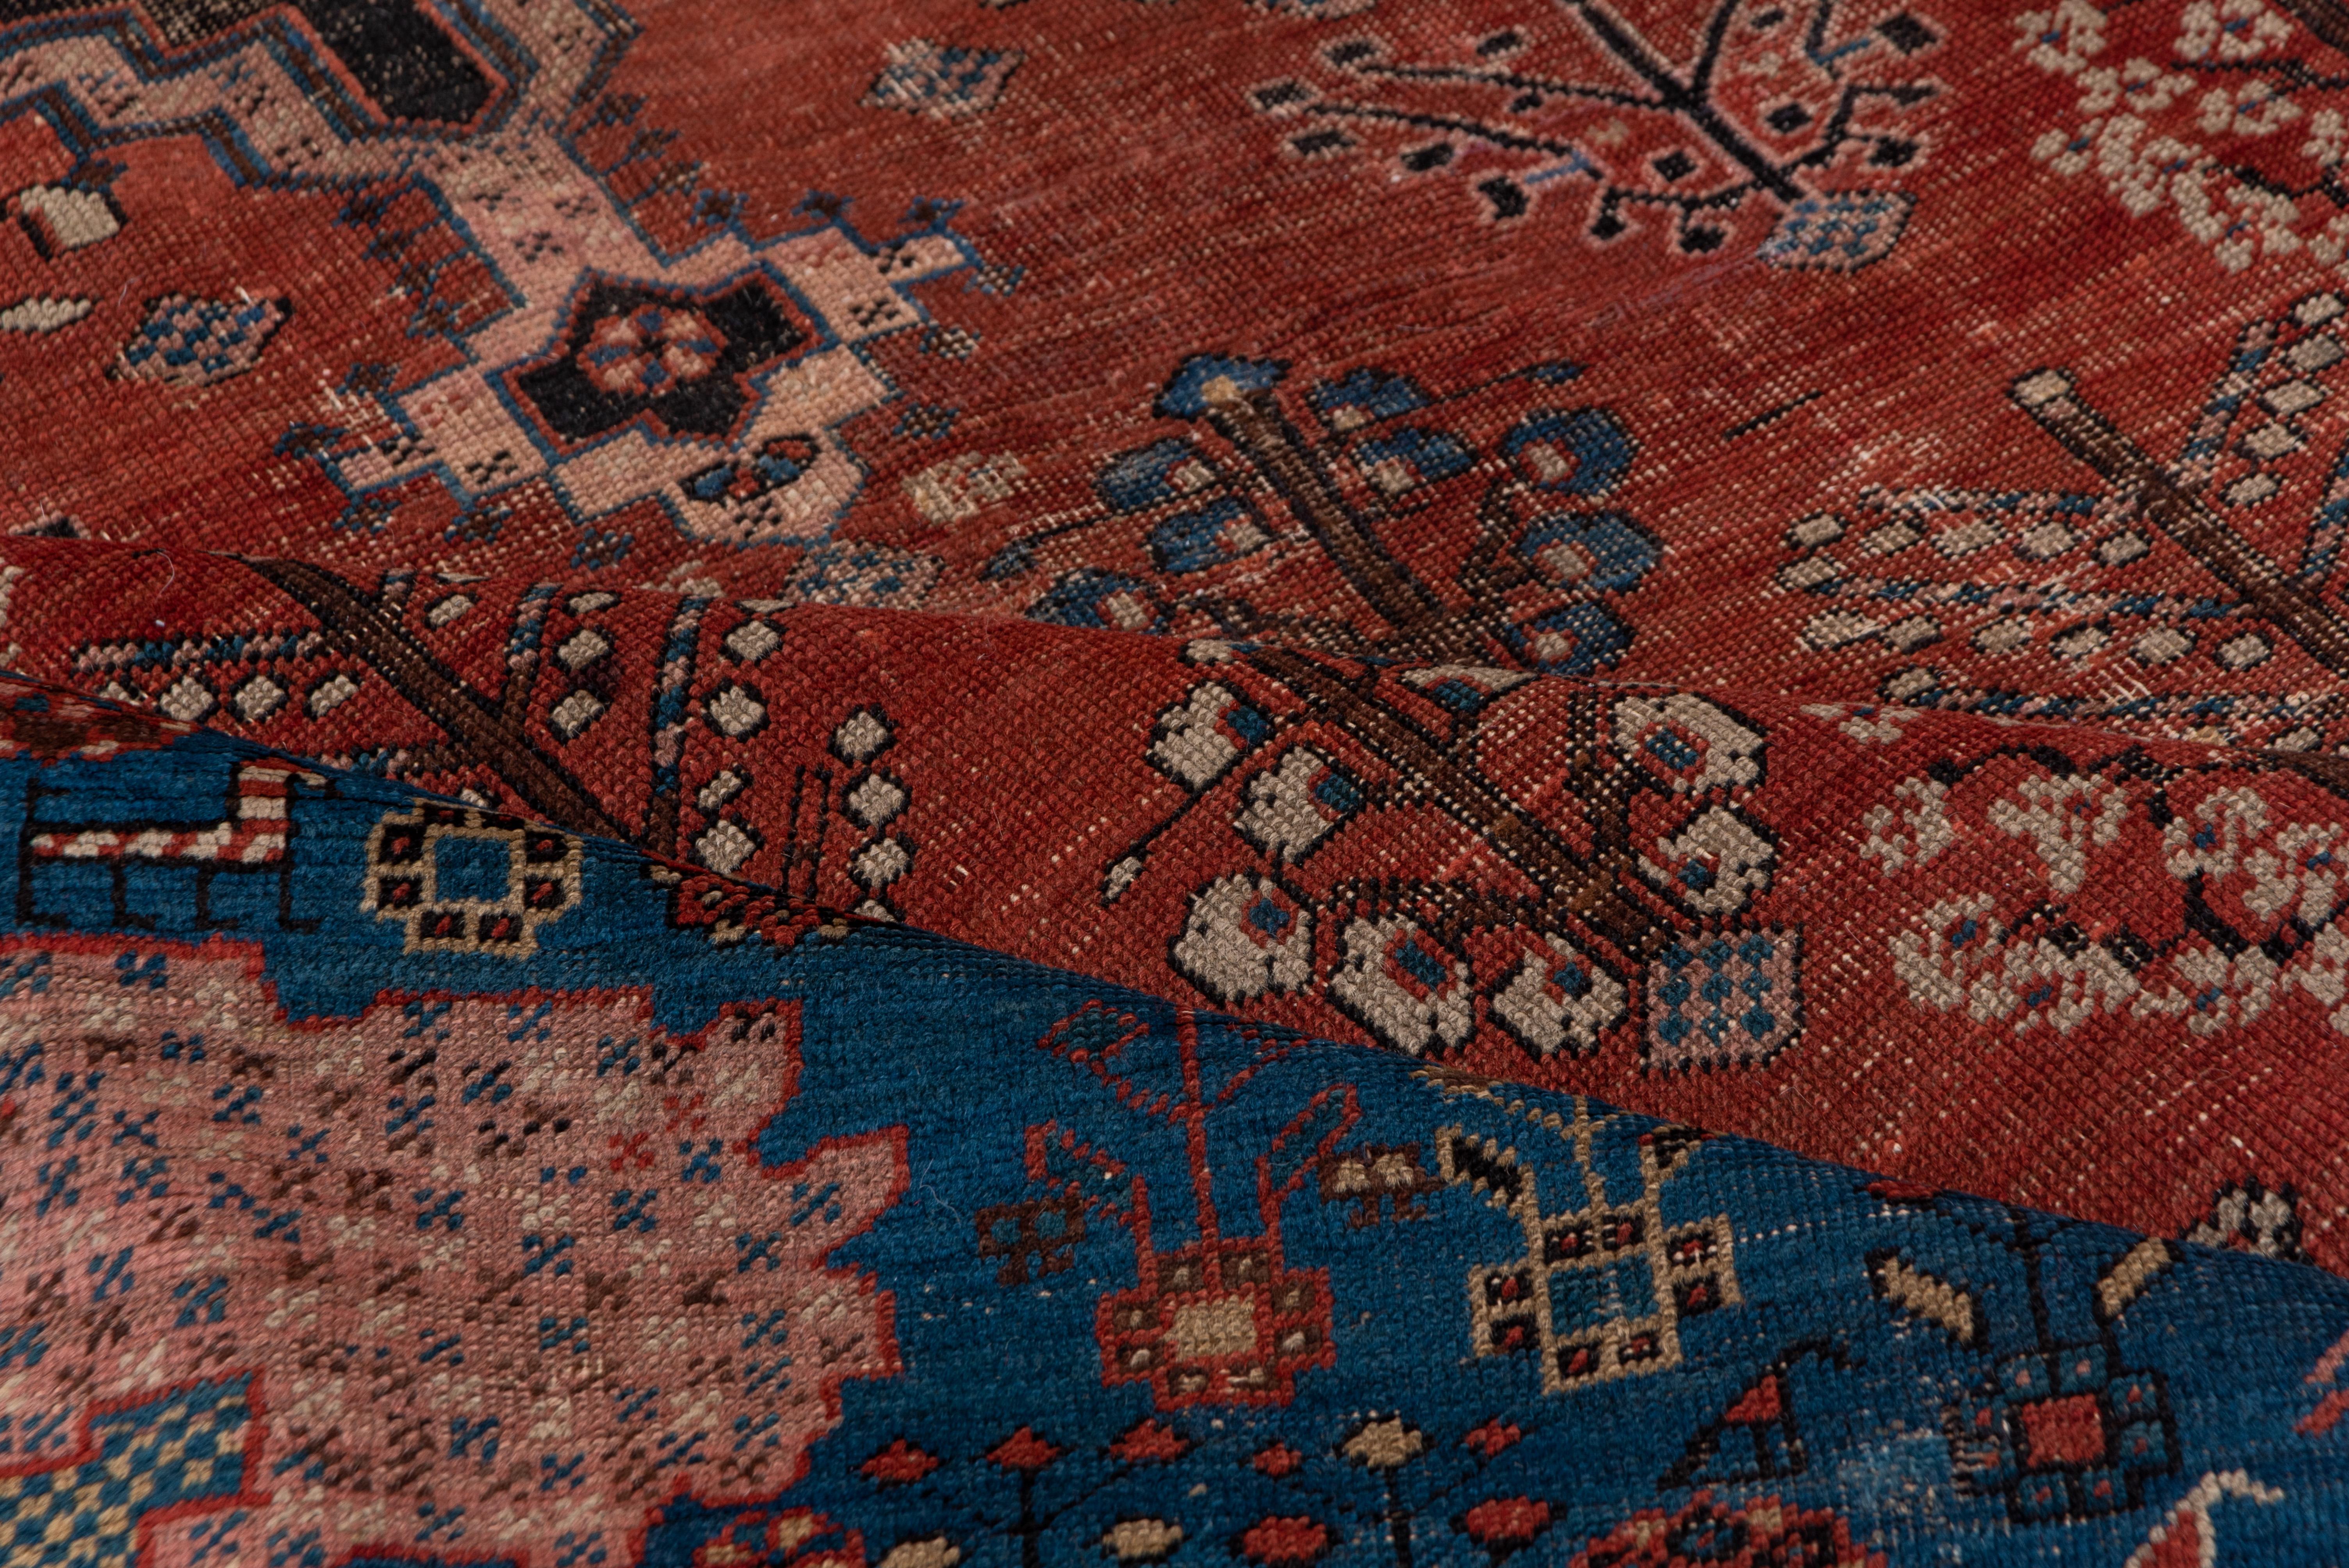 With a decidedly Caucasian palette of madder rust-red (Sub-field), light blue (field) and ivory (details) this antique NW Persian rural carpet shows Joshegan-like flower modules in the field around a navy stepped regular hexagon medallion enclosing